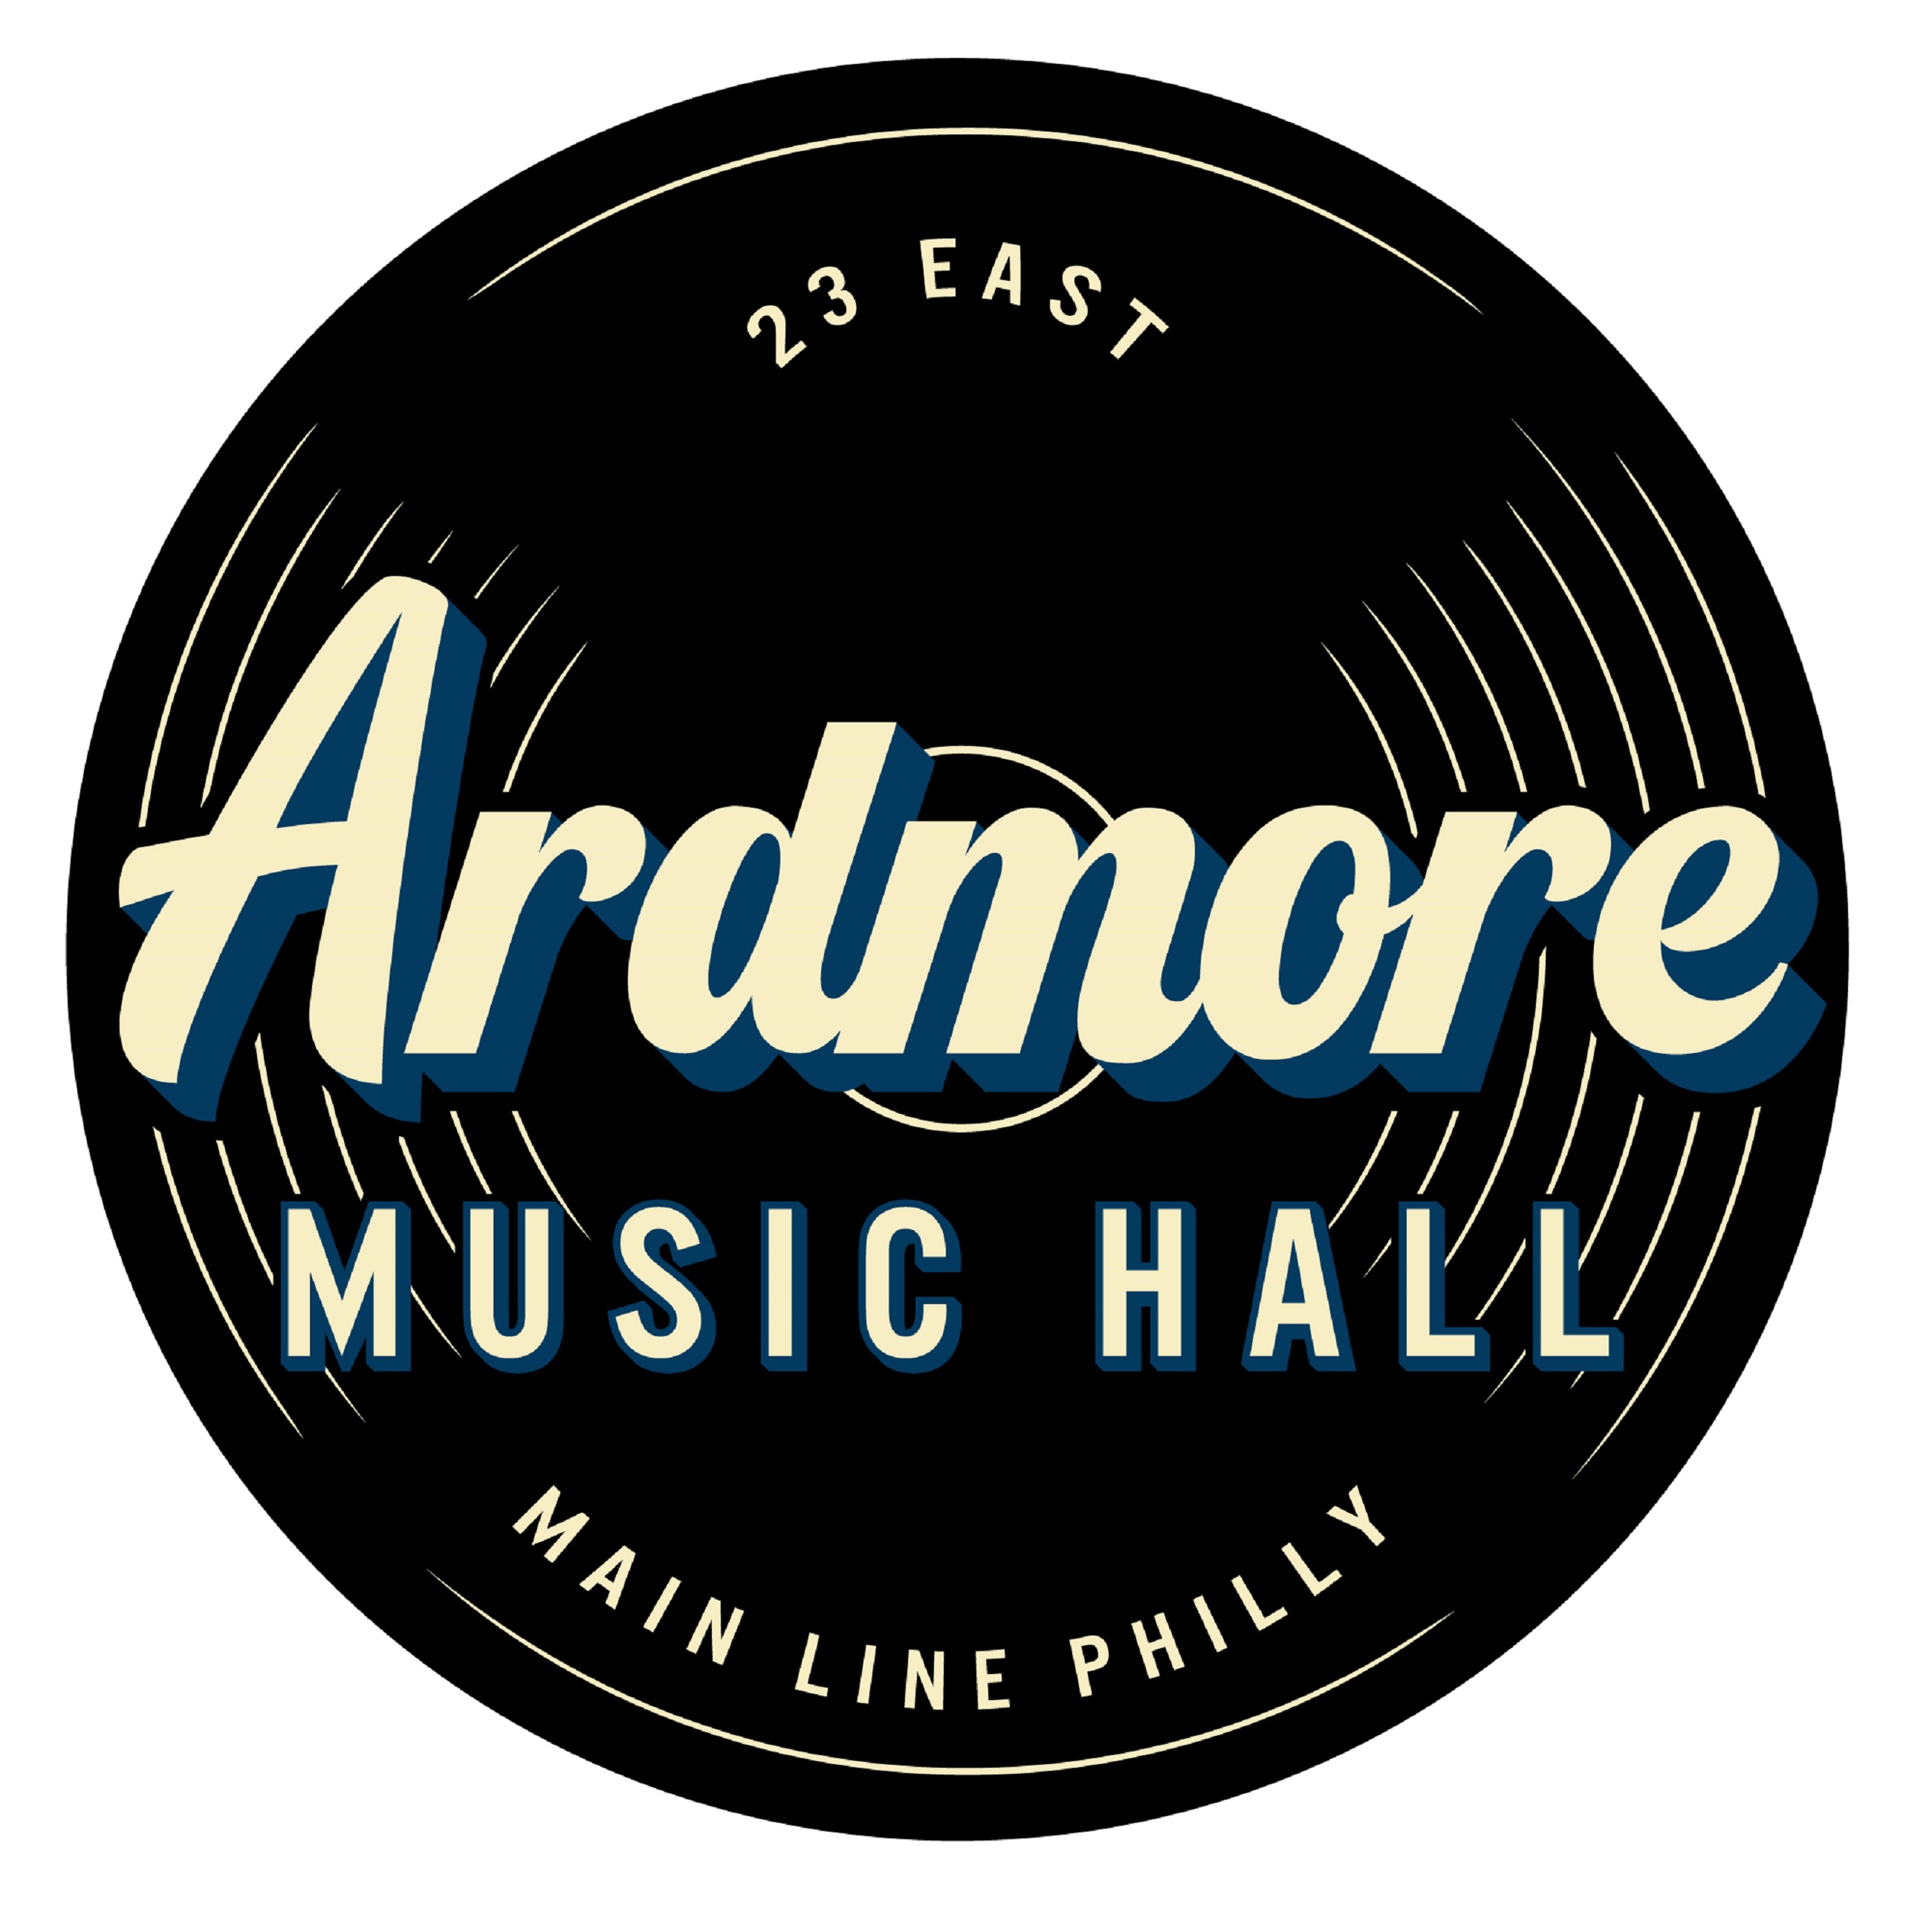 Ardmore Music Hall Announces Updated Brand Identity with Redesigned Logo & New Merch Store